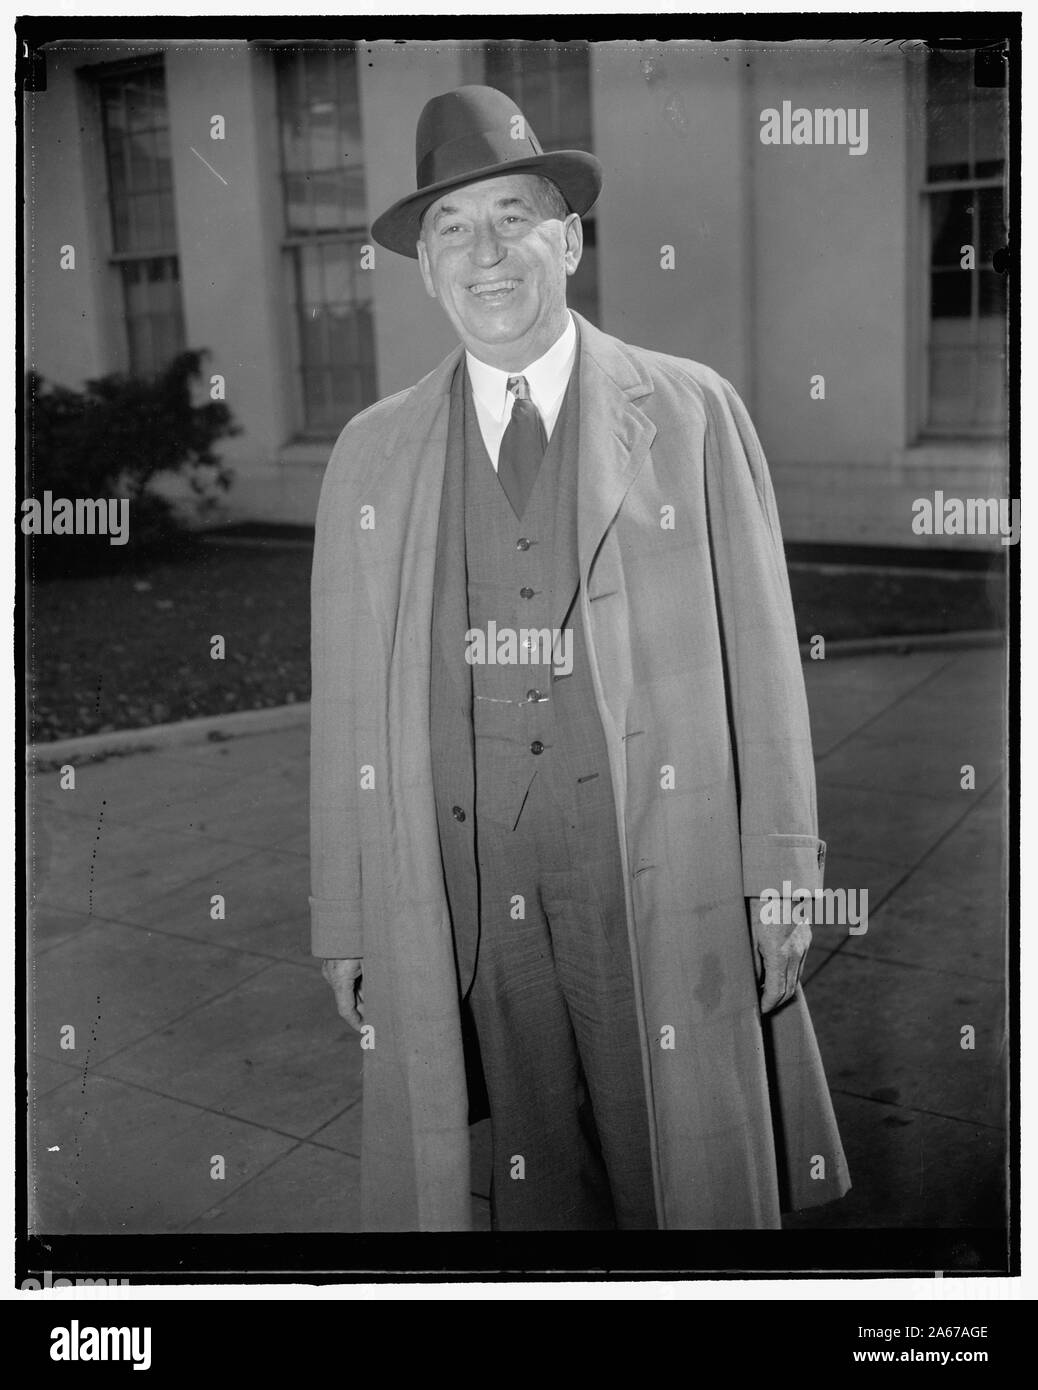 White House caller. Washington, D.C., Oct. 8. Walter Chrysler, automobile magnate, was a White House caller today. He refused to divulge the nature of his conversation with President Roosevelt. 10/8/37 Stock Photo